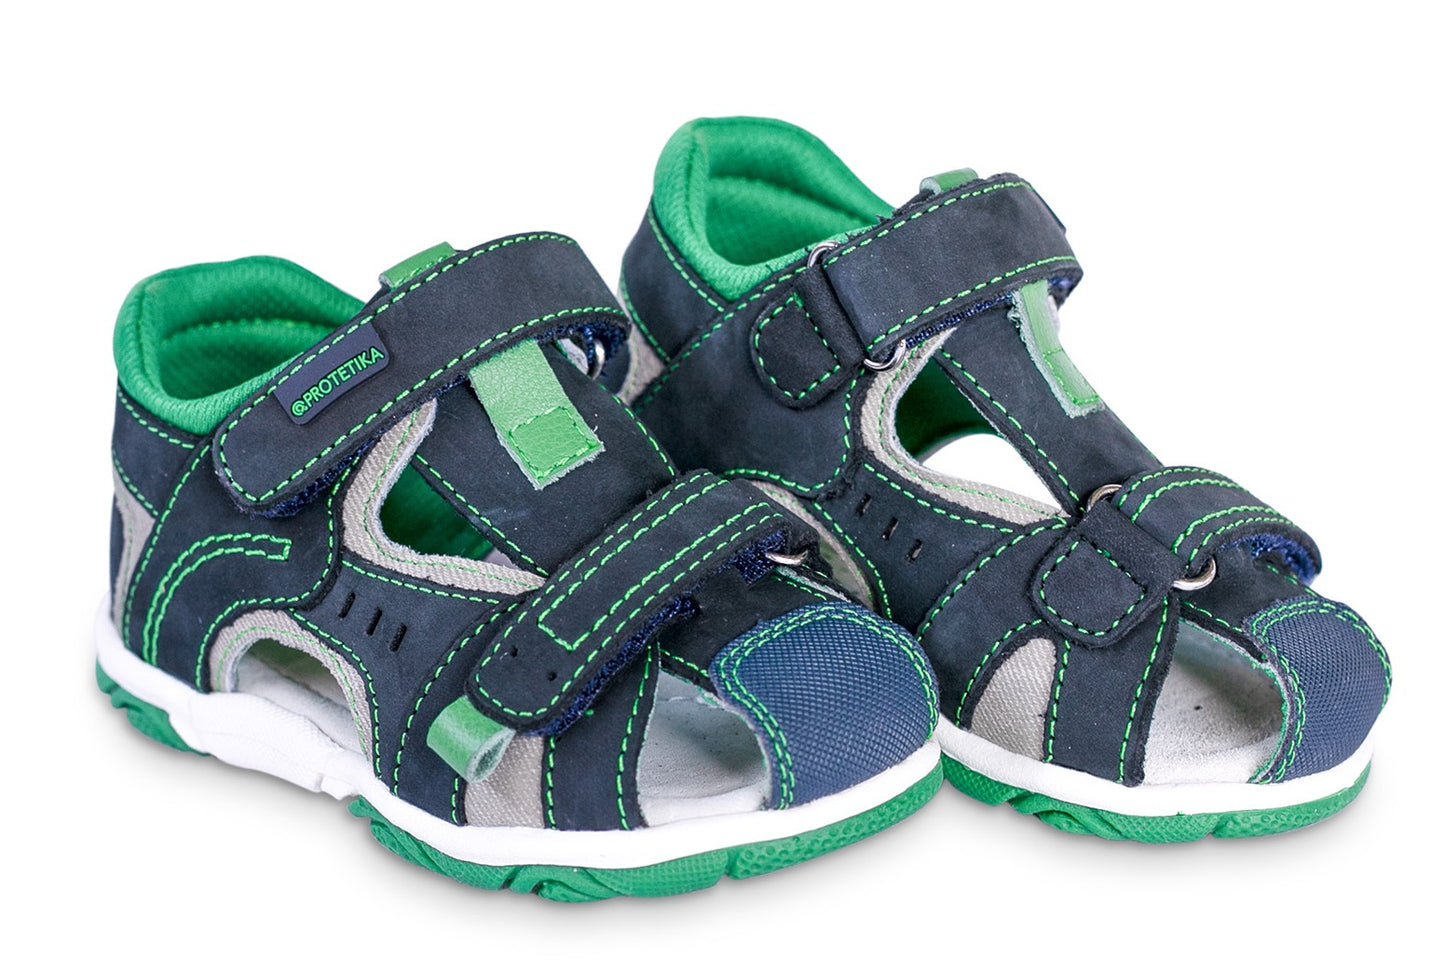 LORENZO green toddler boy arch support sandals - feelgoodshoes.ae